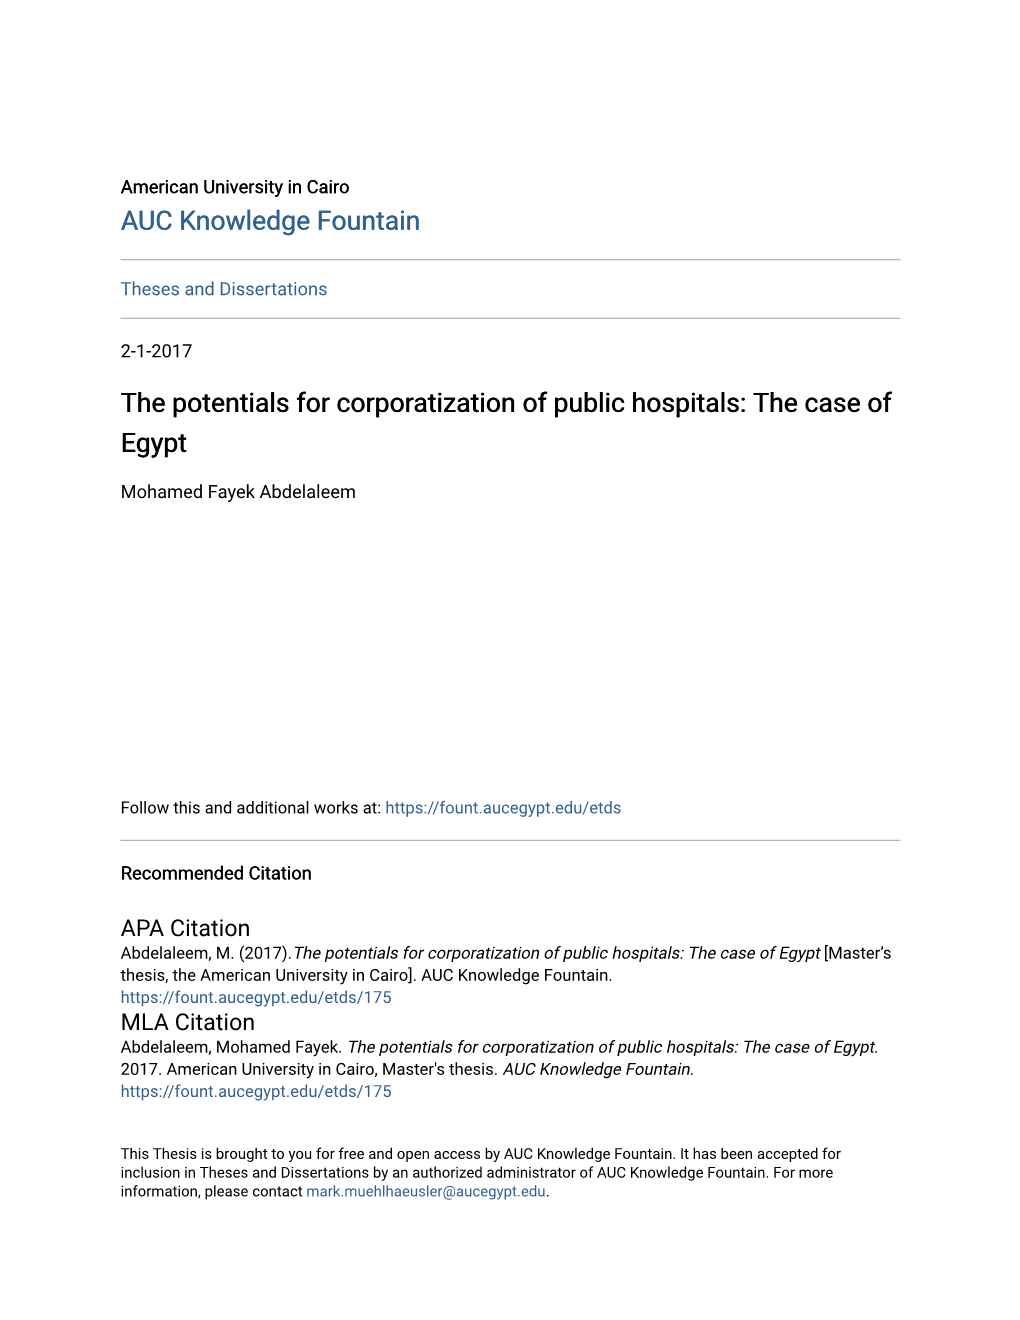 The Potentials for Corporatization of Public Hospitals: the Case of Egypt